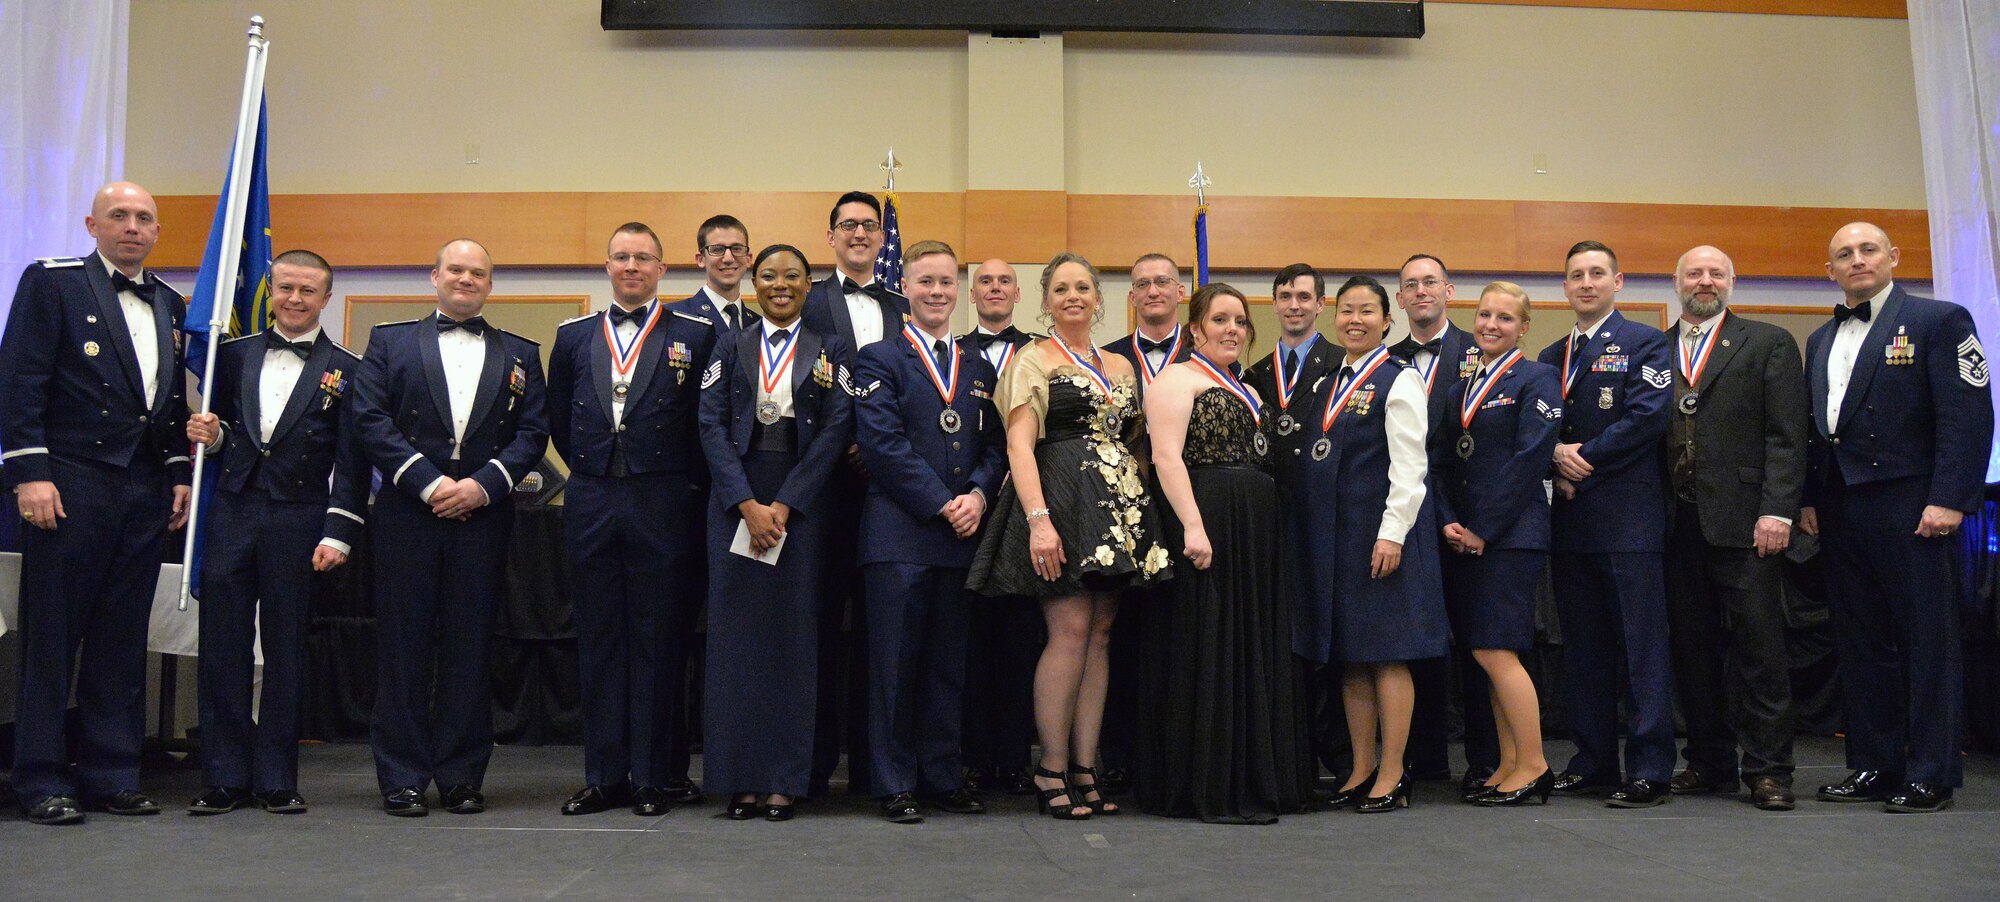 Col. Ron Allen, 341st Missile Wing commander, far left, and Chief Master Sgt. Thom Stiles, 341st MW command chief, far right, pose for a photo with the 341st MW Annual Award winners at the Grizzly Bend Feb. 25, 2017, at Malmstrom Air Force Base, Mont. Annual Award recipients represent the wing’s finest from all facets across the base; from junior airman of the year to spouse of the year. (U.S. Air Force photo/Airman 1st Class Magen M. Reeves)